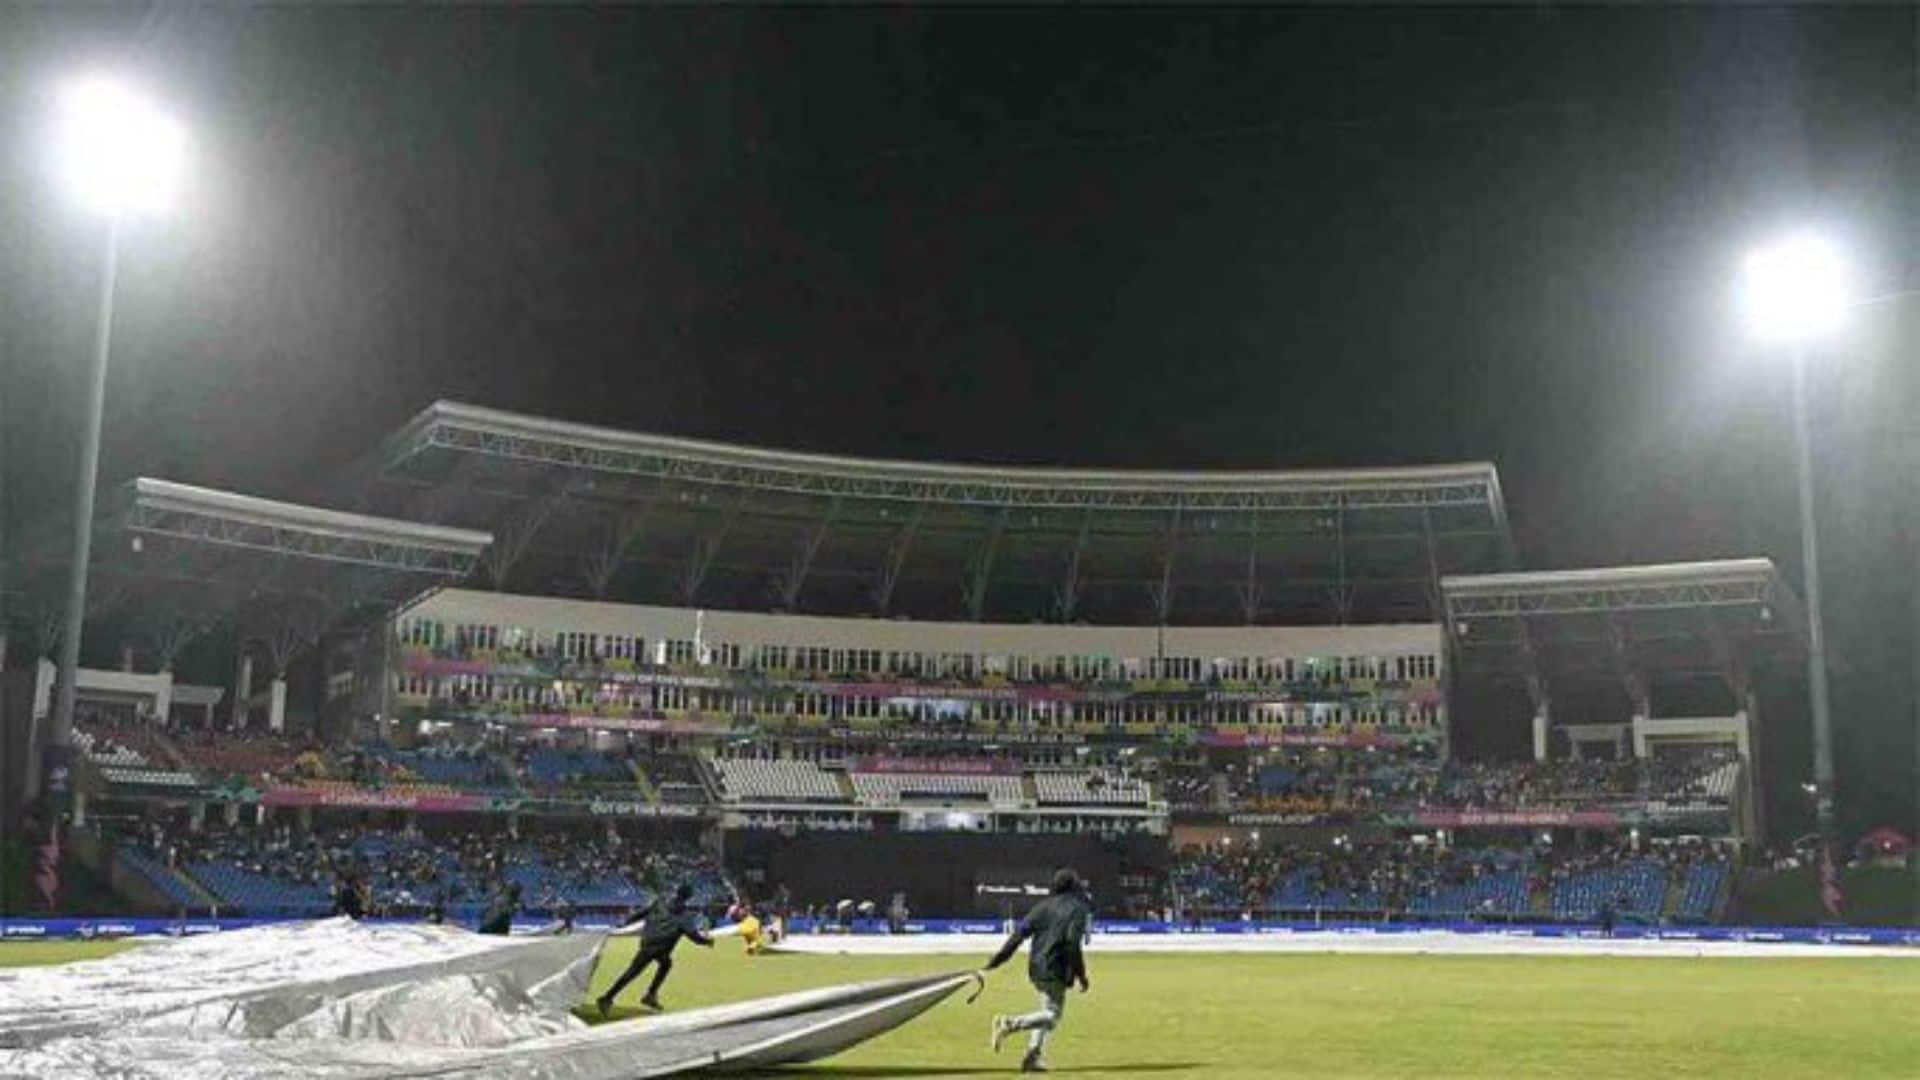 T20 World Cup | Rain Arrives In Antigua, 'This' Team To Win AUS vs BAN Based On DLS